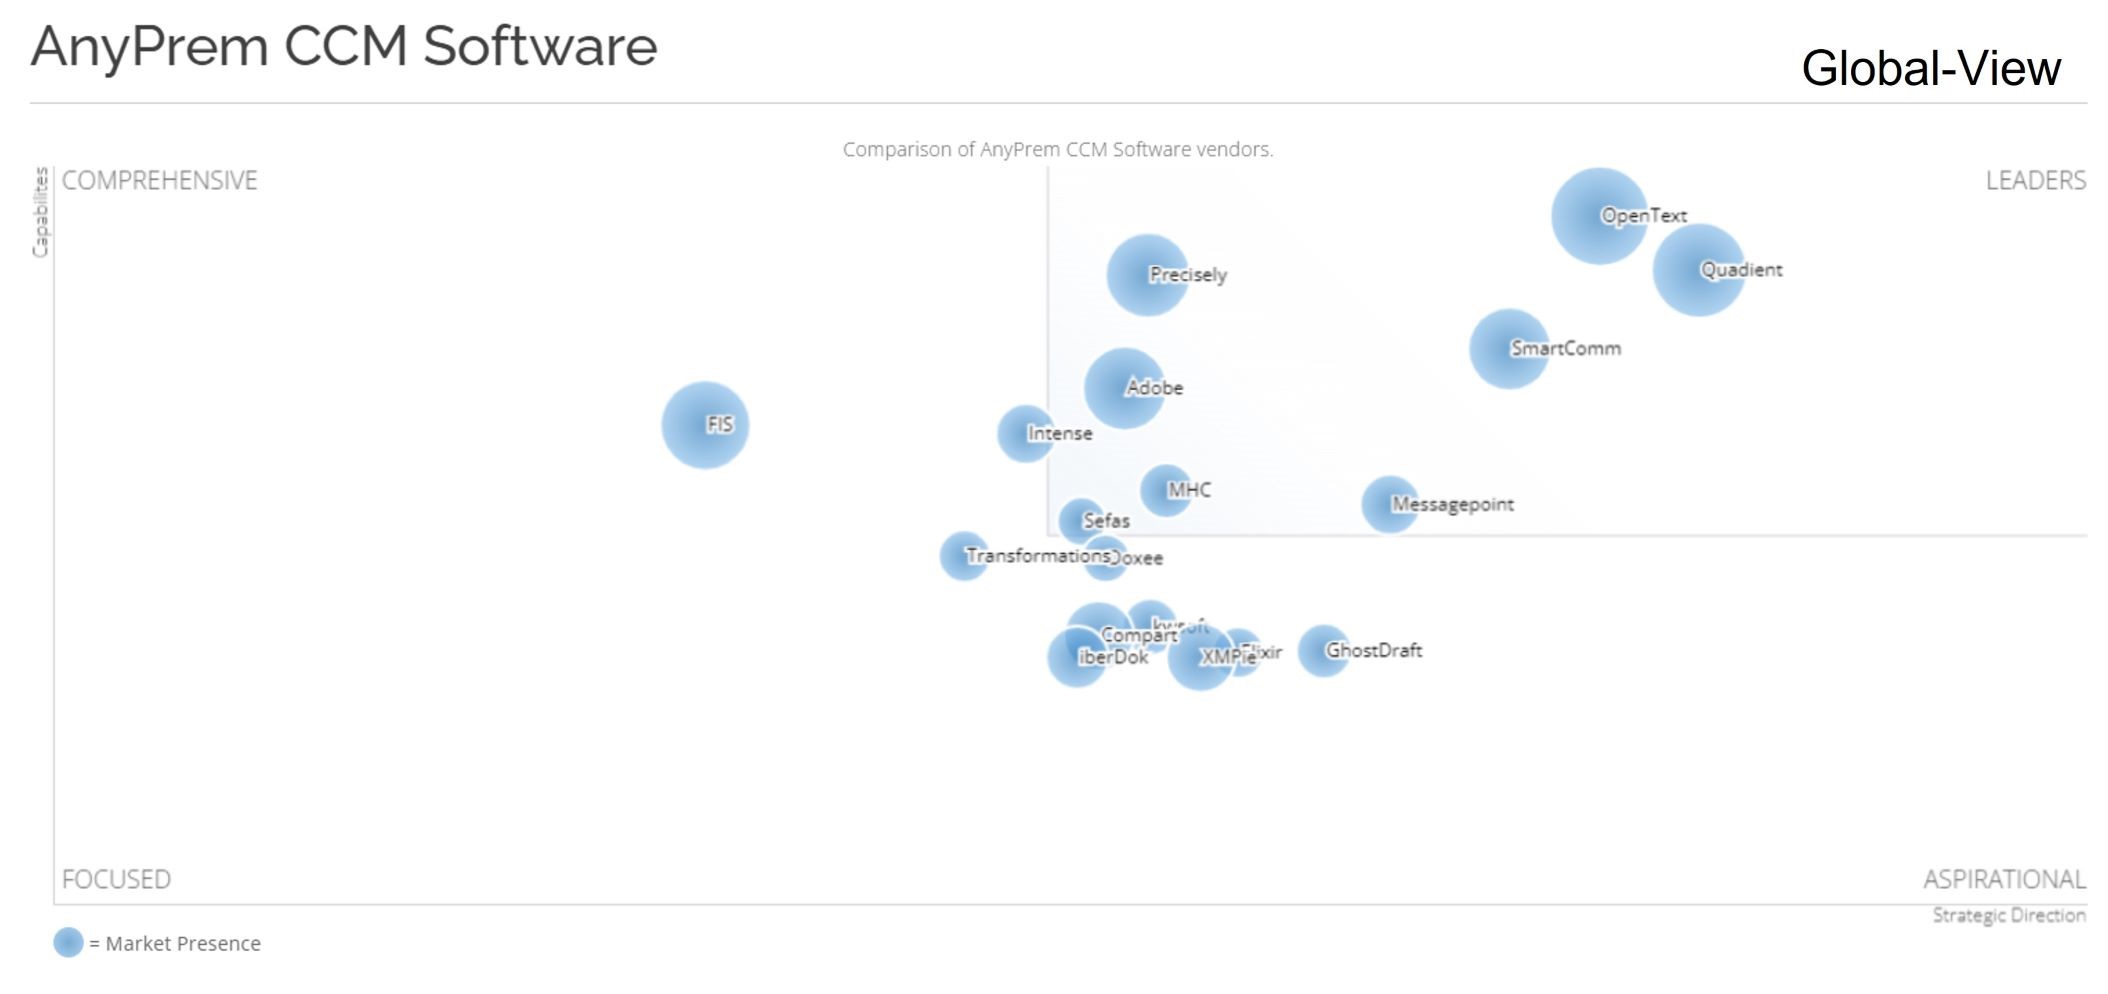 The AnyPrem CCM Software graphic from Aspire shows OpenText in the upper right quadrant of the graph, ahead of SmartComm, Messagepoint., Precisely, Adobe, and MHC. Quadient is slightly to the right of OpenText.